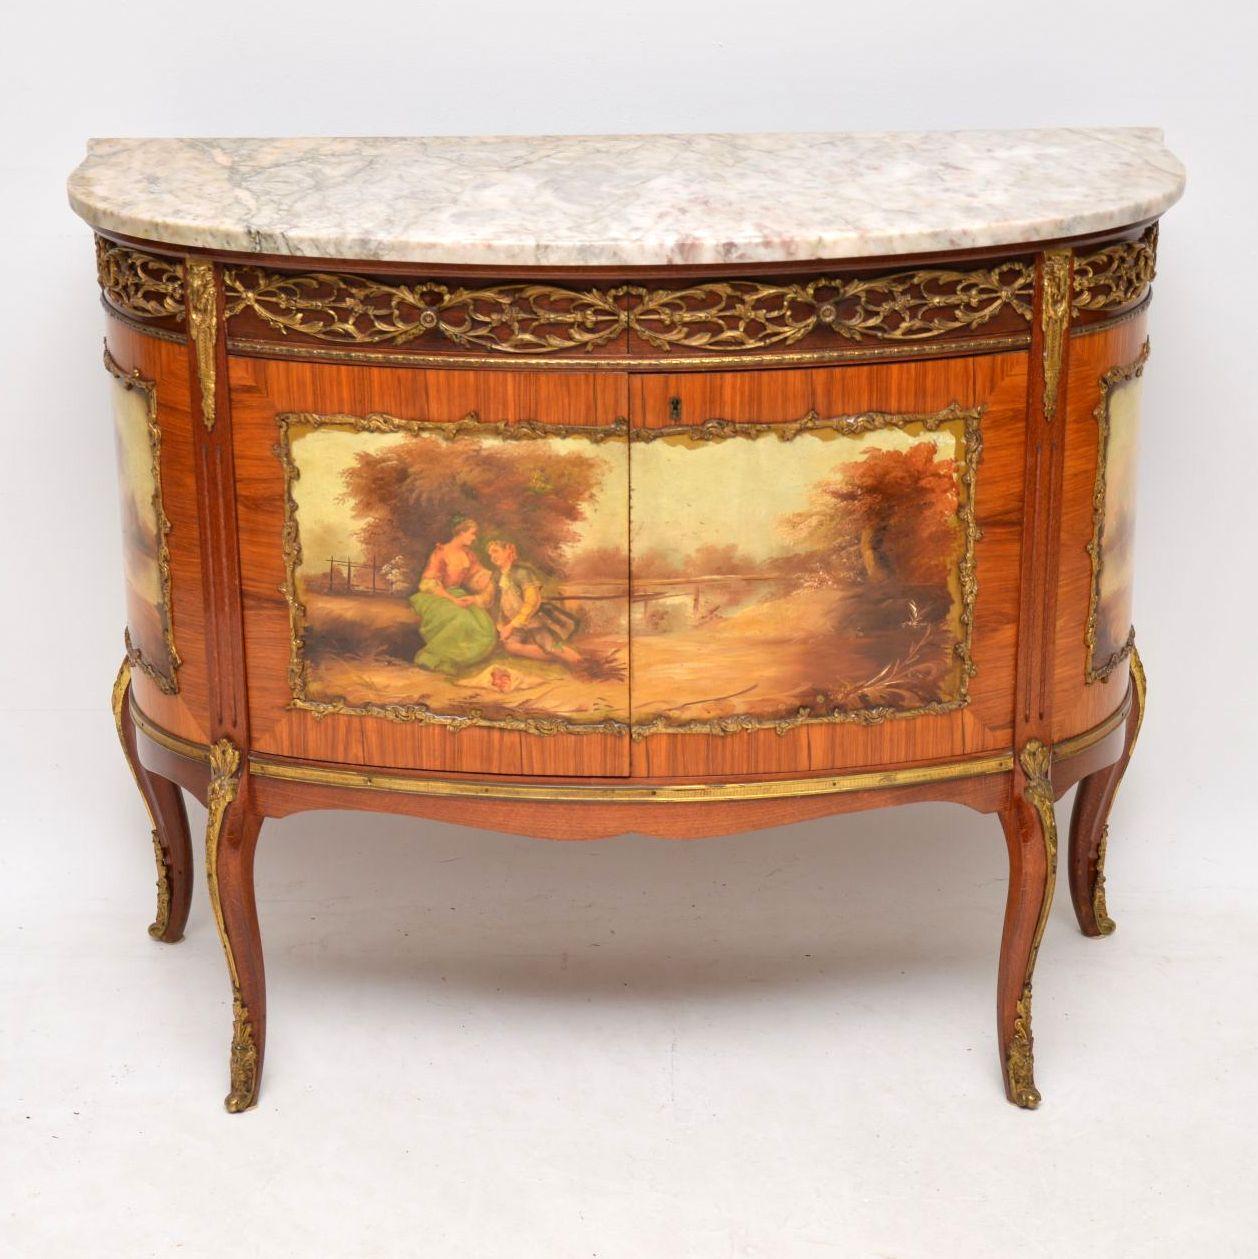 Very impressive antique French style marble-top cabinet with painted decoration and gilt bronze mounts. It’s all in excellent original condition including the marble and I would date this cabinet to around the 1920s-1930s period. There are two